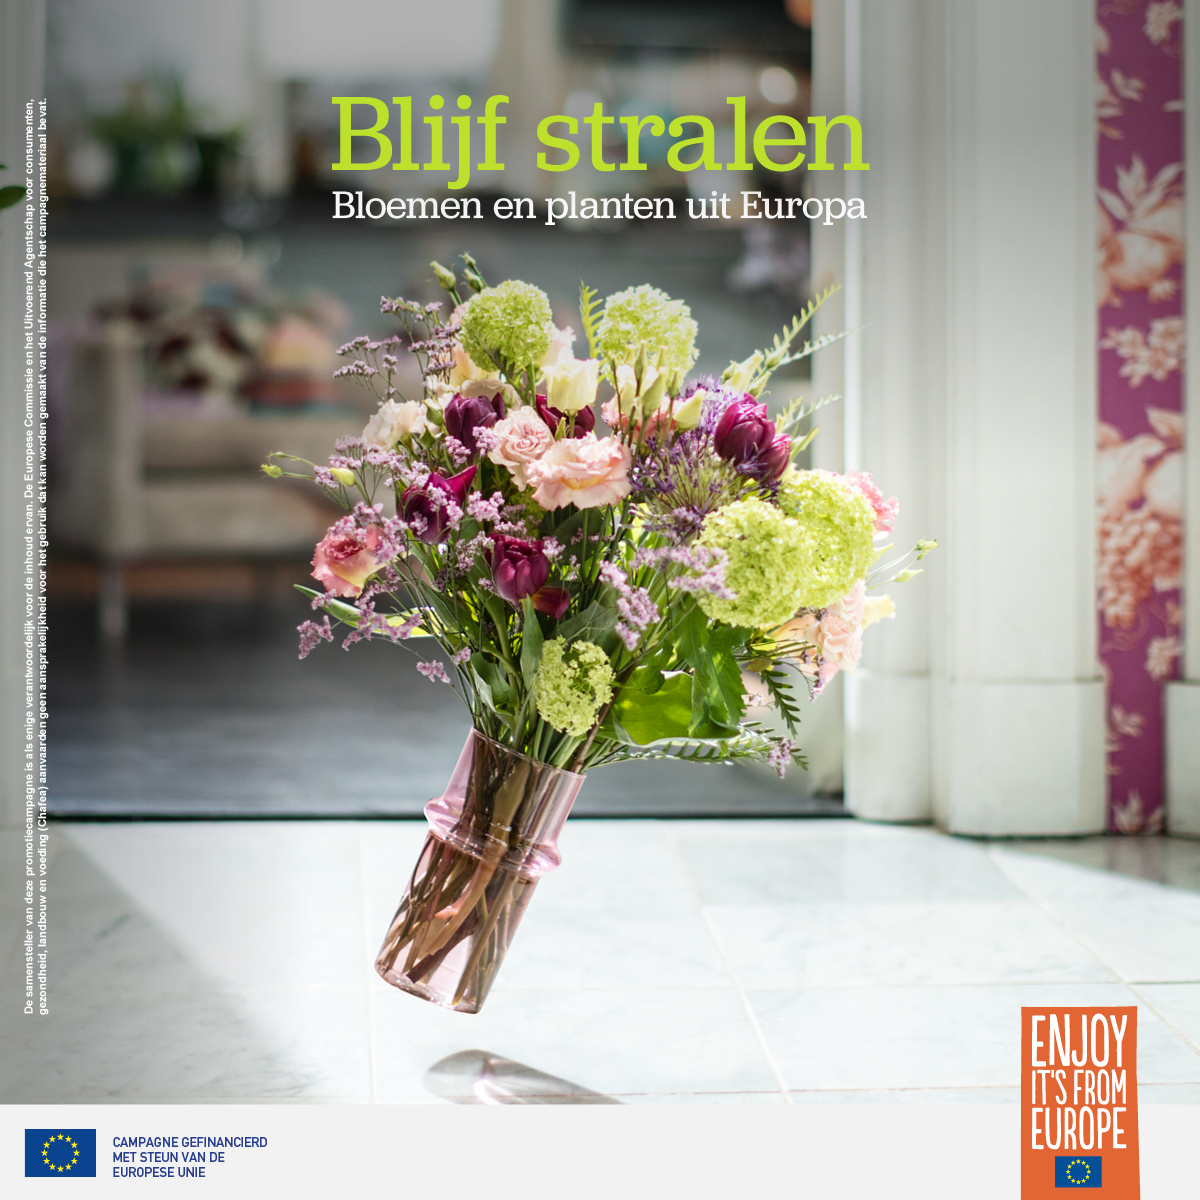 New promotional campaign for European flowers and plants-2